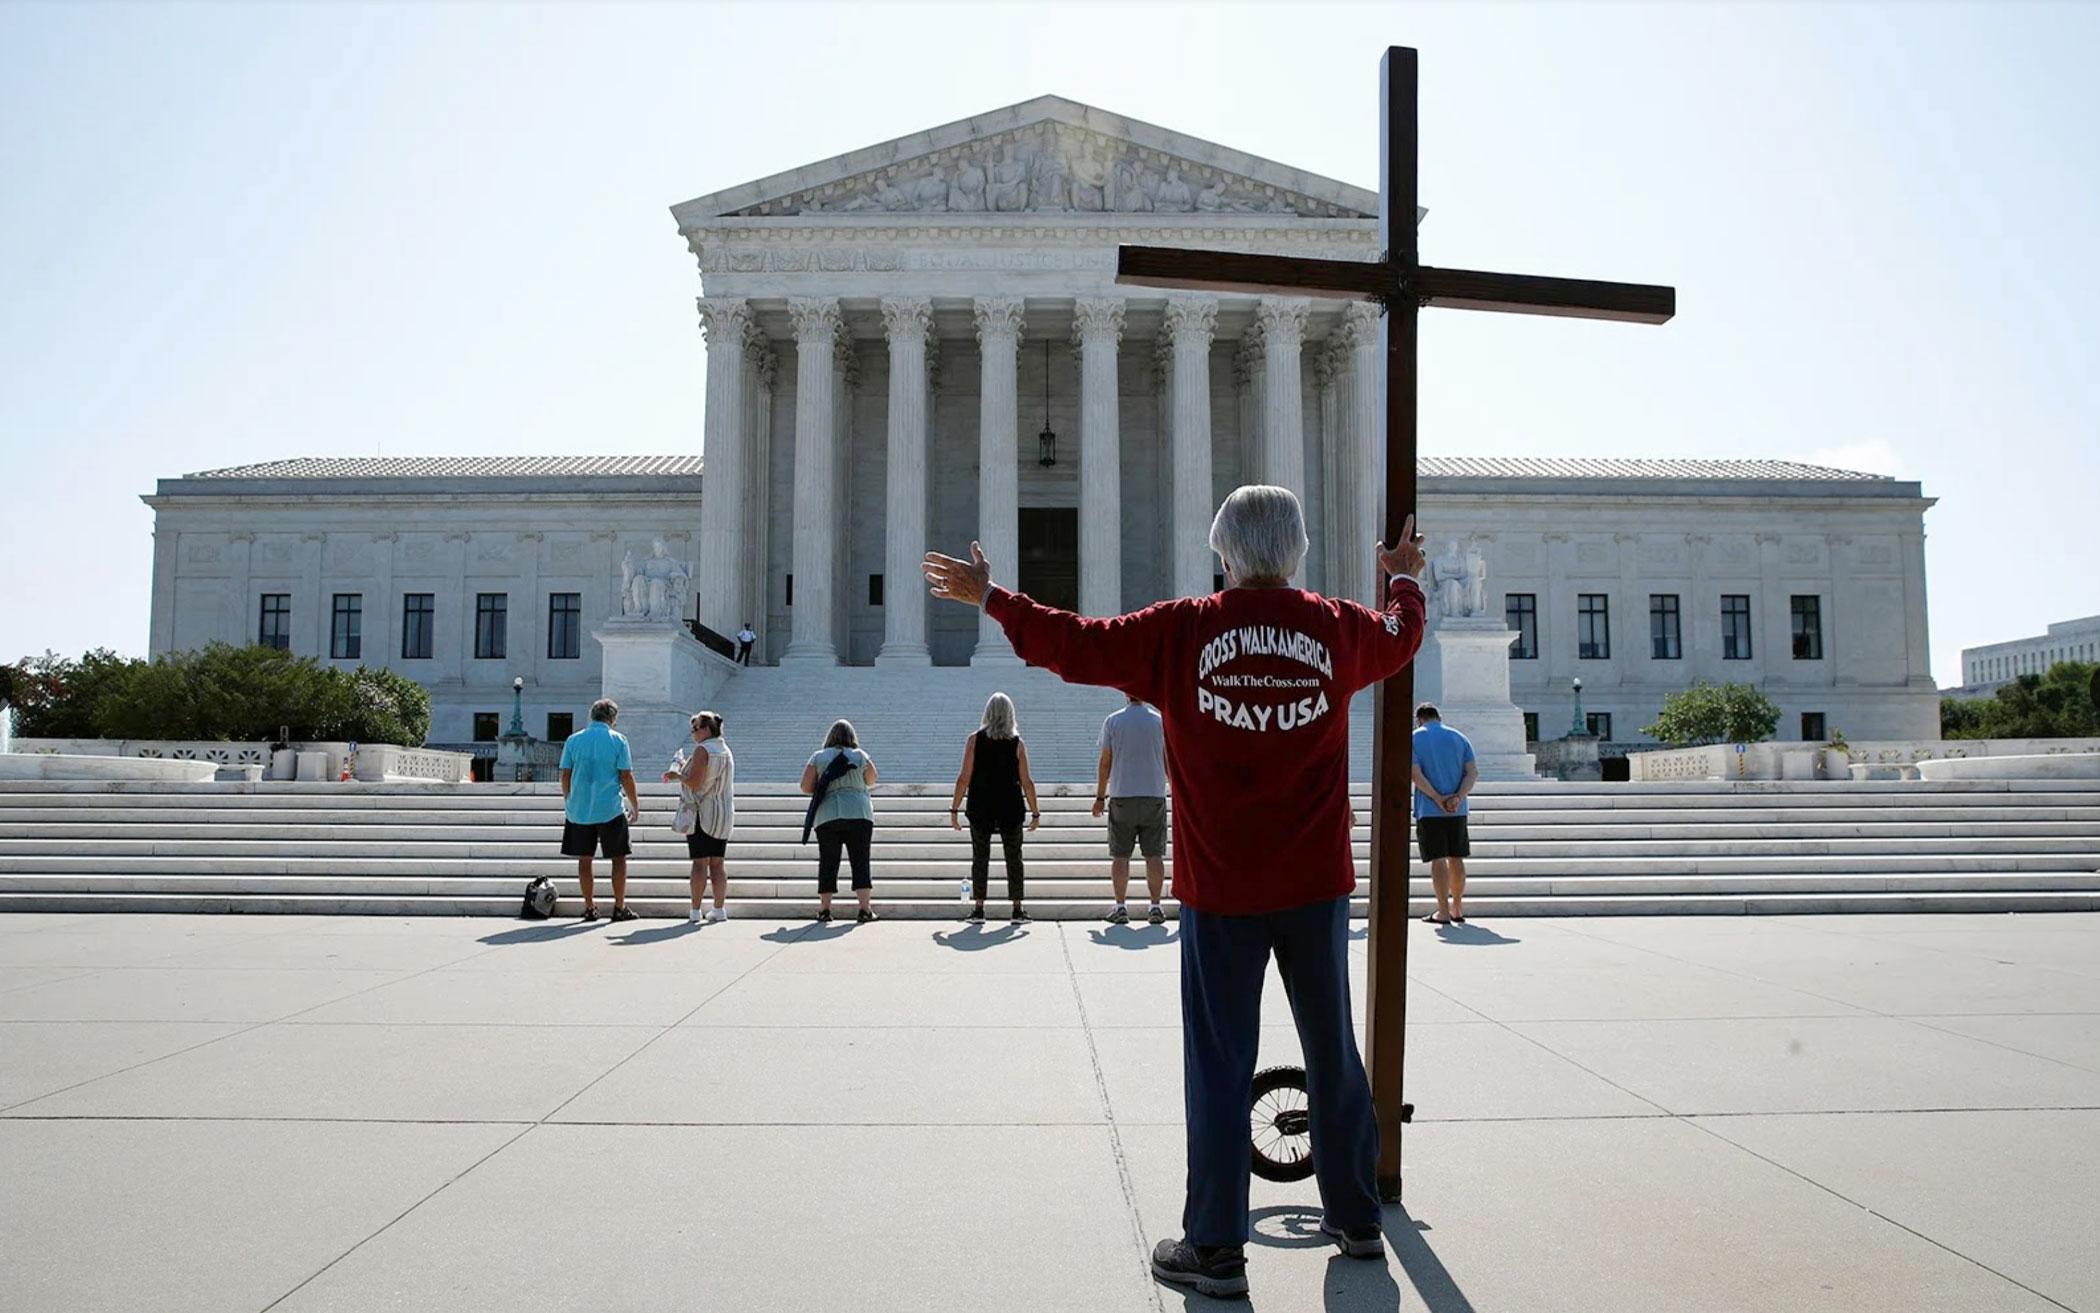 Tom Alexander holds a cross as he prays prior to rulings outside the Supreme Court on Capitol Hill in Washington on July 8, 2020.